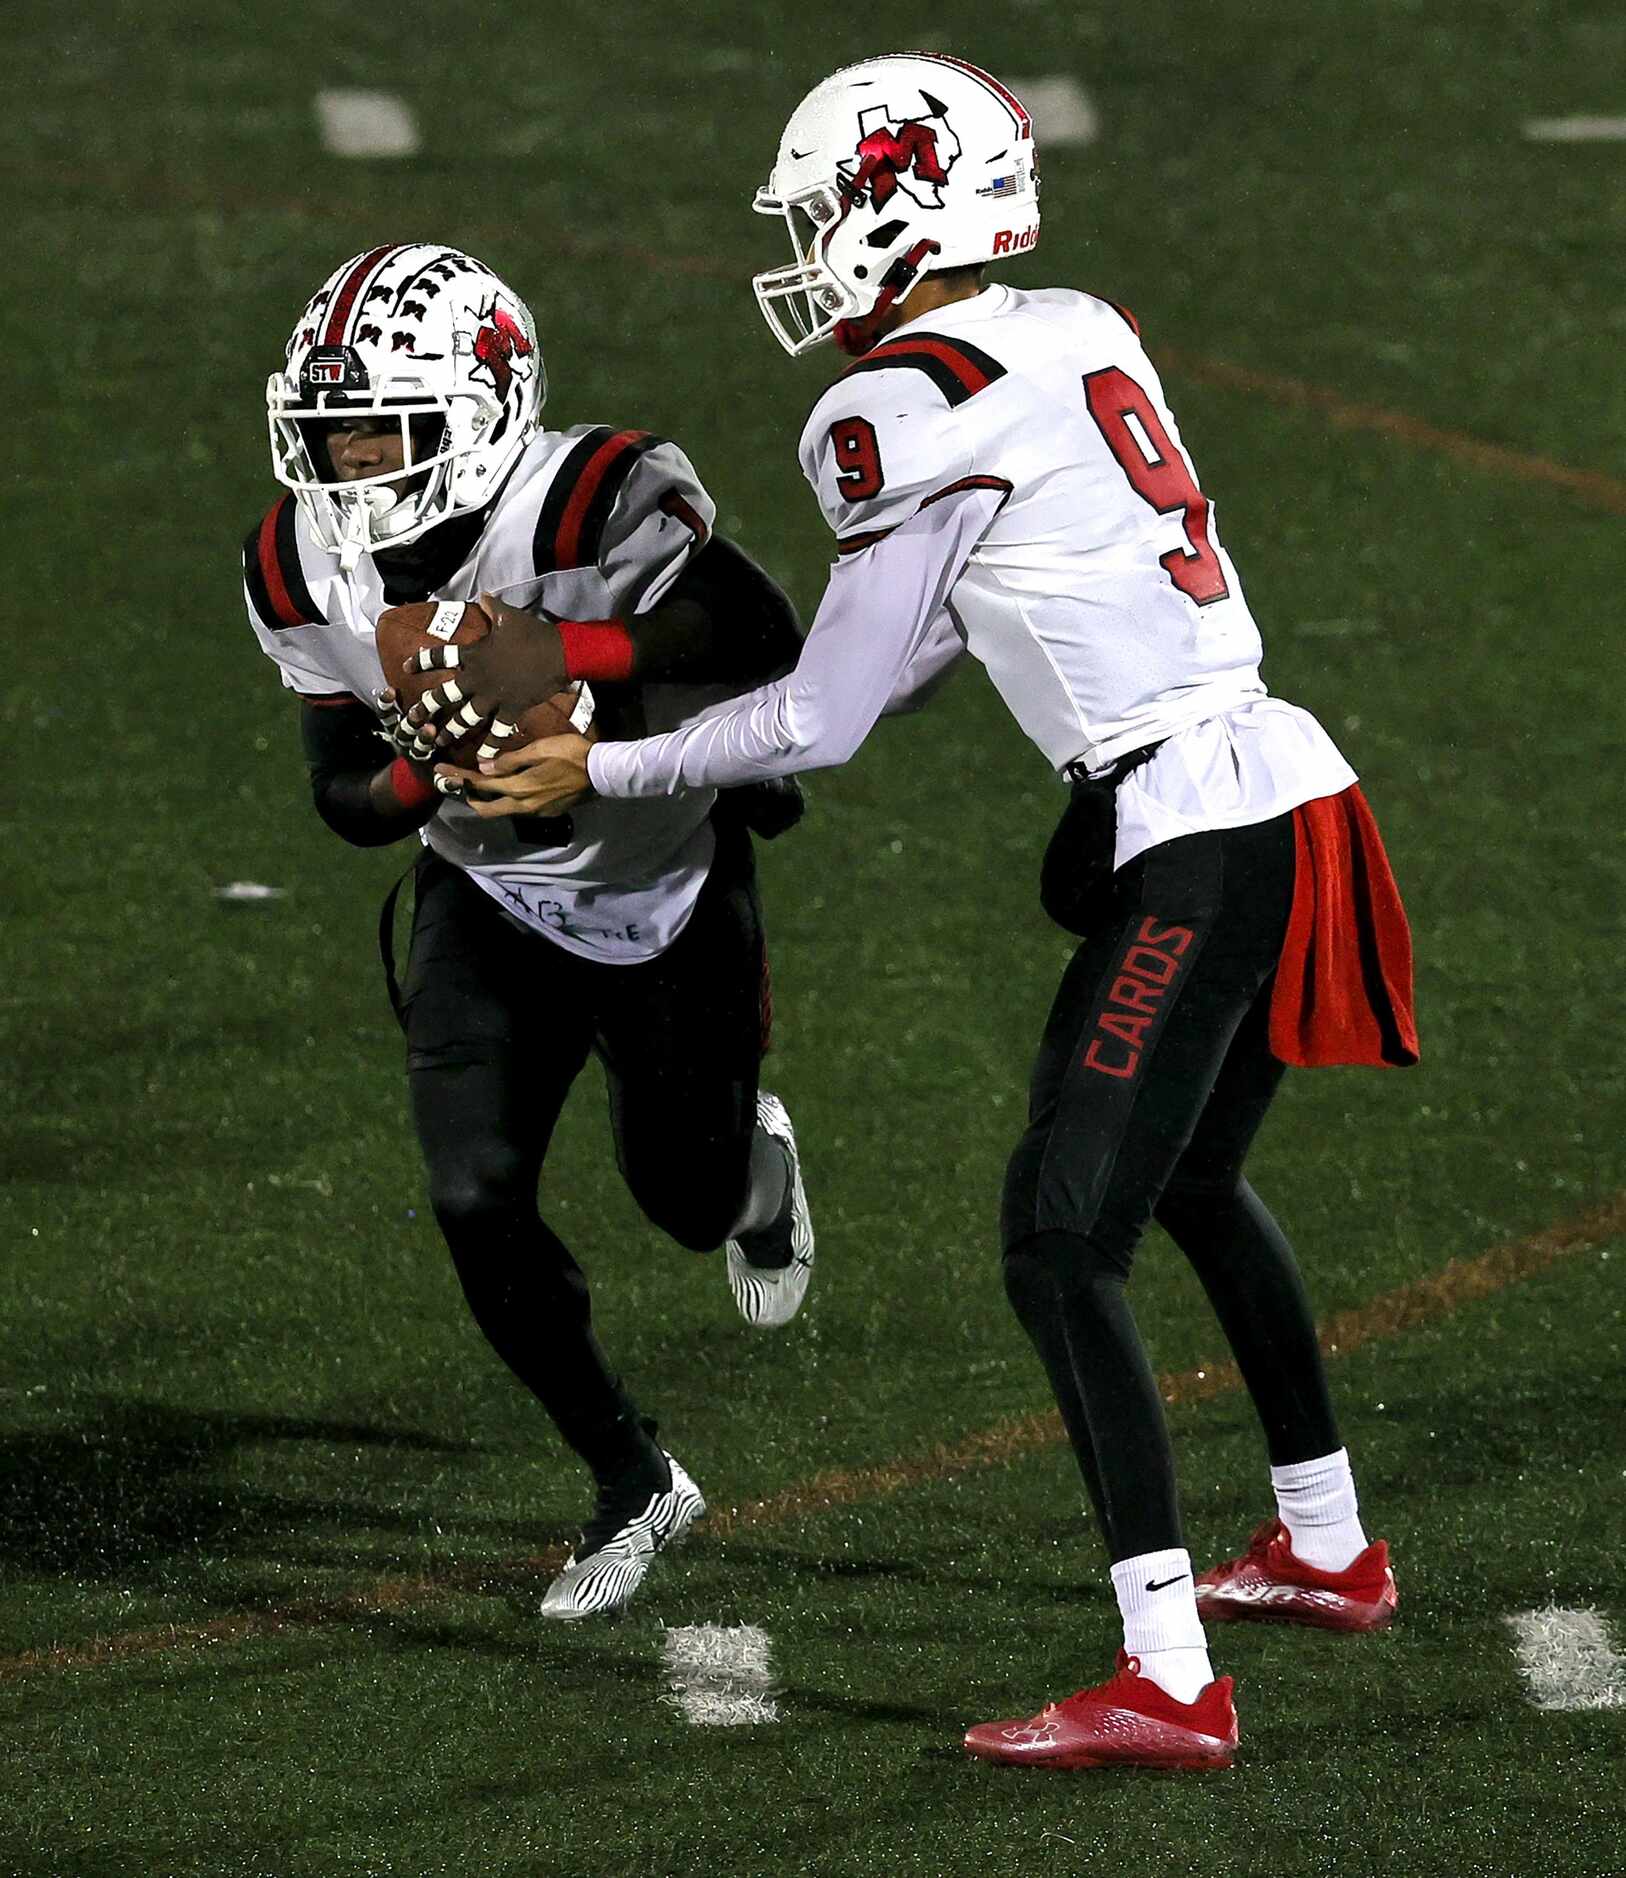 MacArthur running back Darelle Smith gets the hand off from quarterback Glendon Willis (9)...